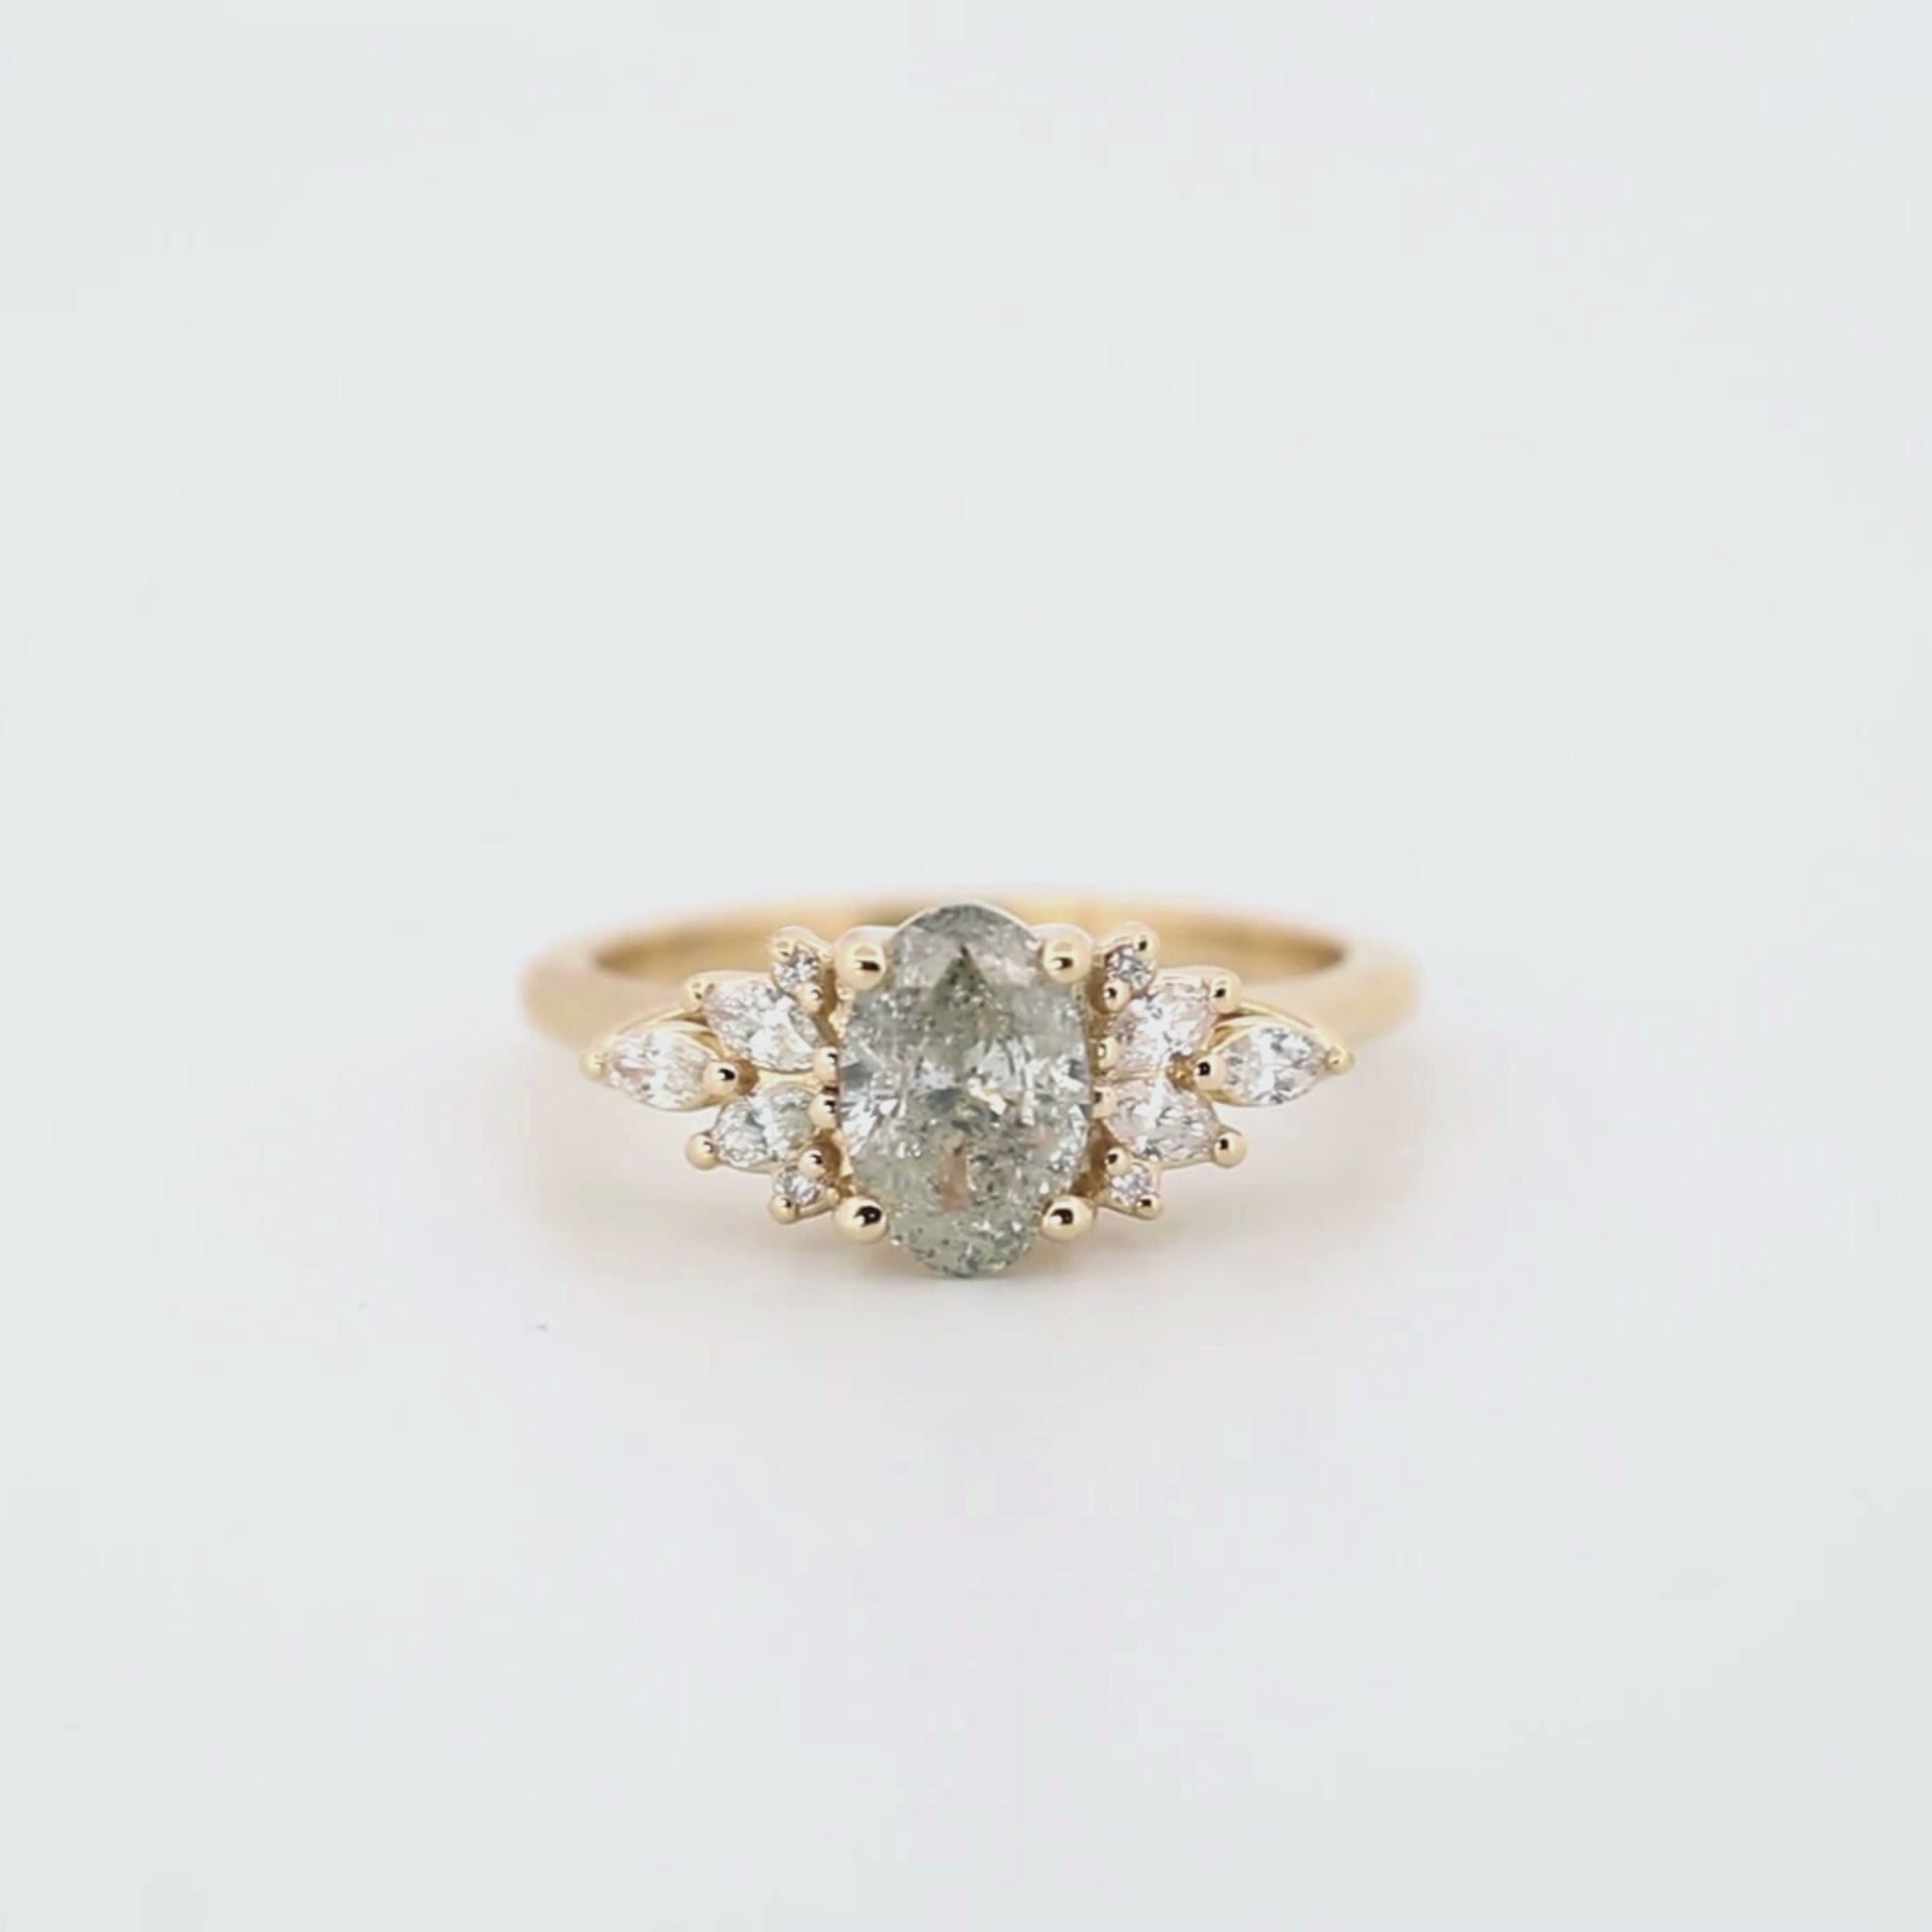 Odette Ring with a 1.05 Carat Oval Gray Salt and Pepper Diamond and White Accent Diamonds in 14k Yellow Gold - Ready to Size and Ship